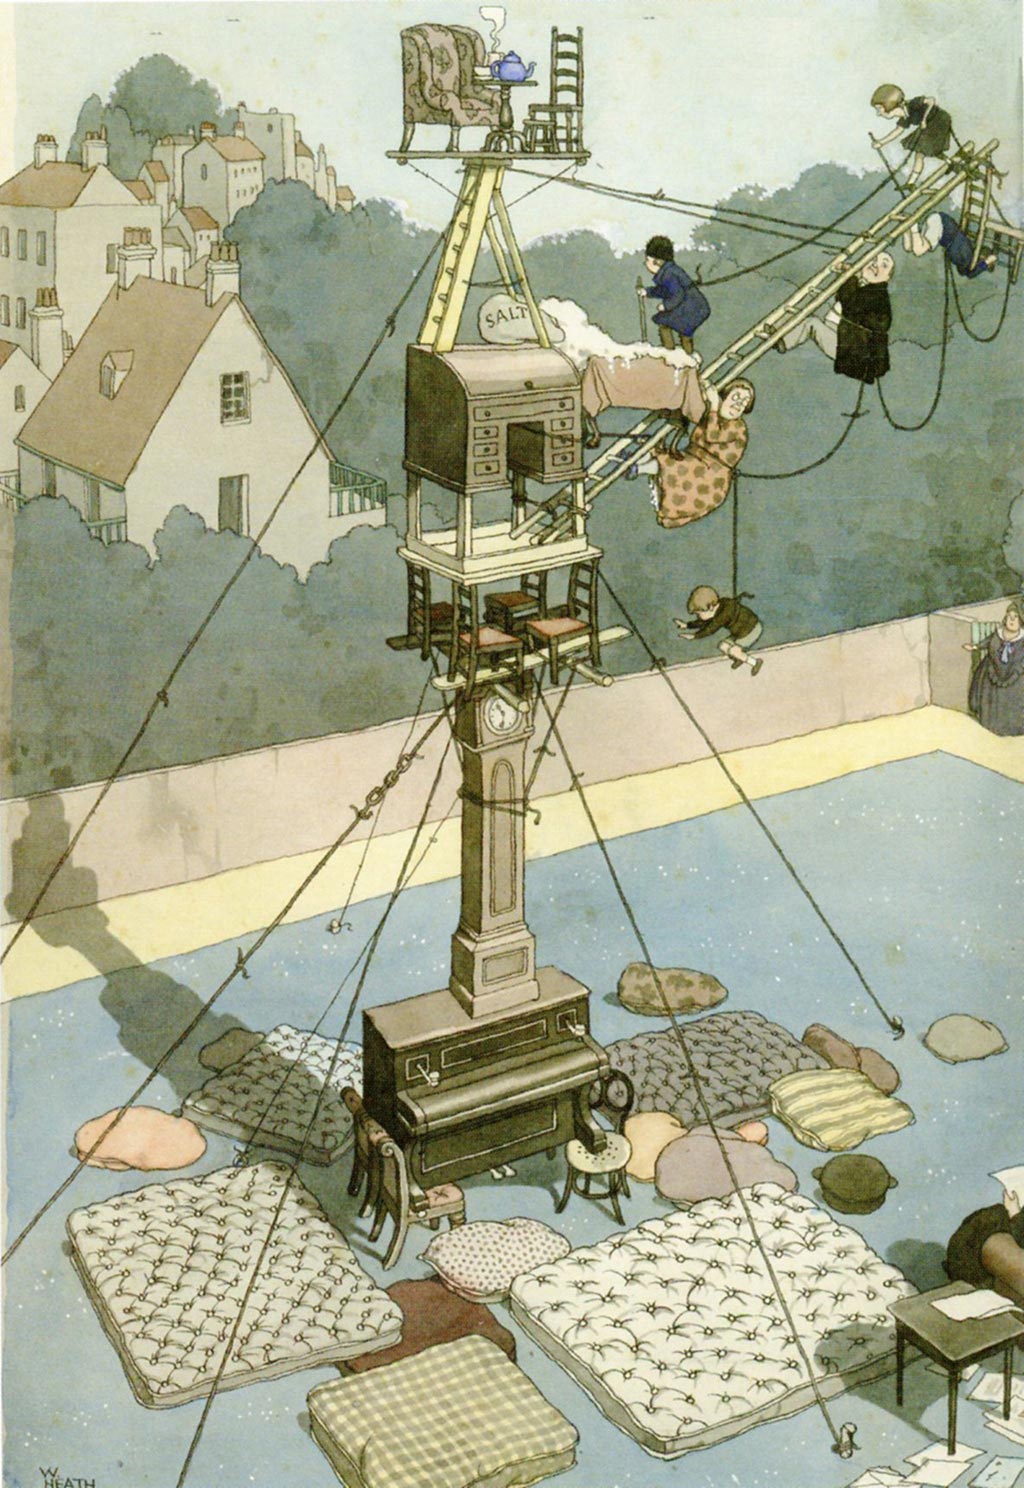 william_heath_robinson_inventions_carrying_out_the_correspondance_1928